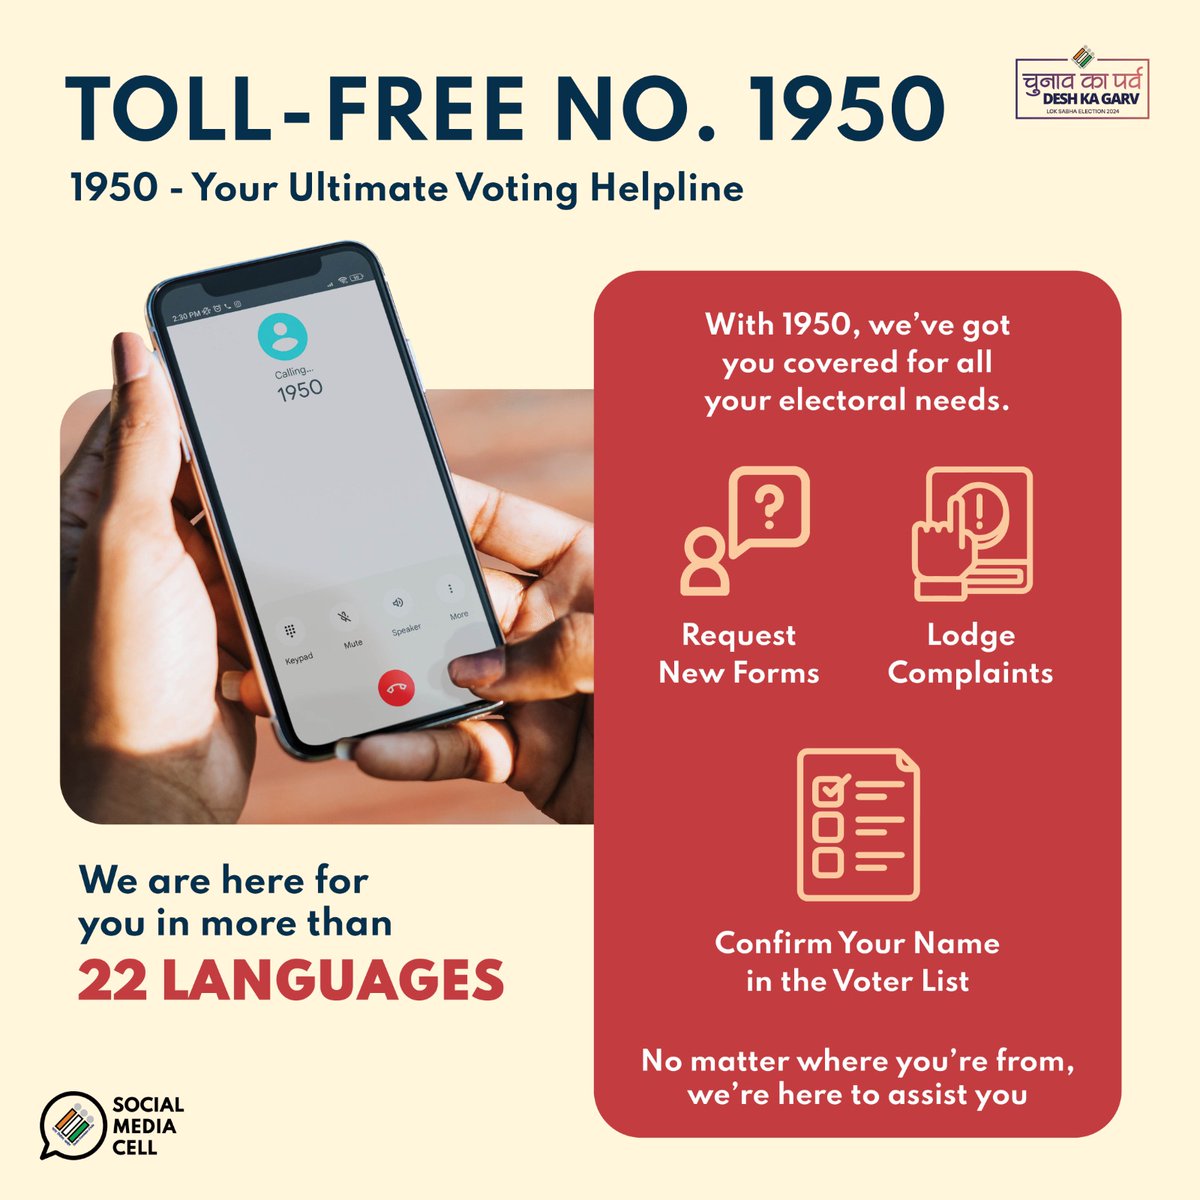 #VoterHelpline is your friend indeed! Just dial #1950

Using our Voter Helpline App you can:
✅ Request new forms
✅Lodge Complaints
✅ Confirm your name in the voter list

For more information related to the General Elections 2024, elections24.eci.gov.in'

#ChunavKaParv   #ECI